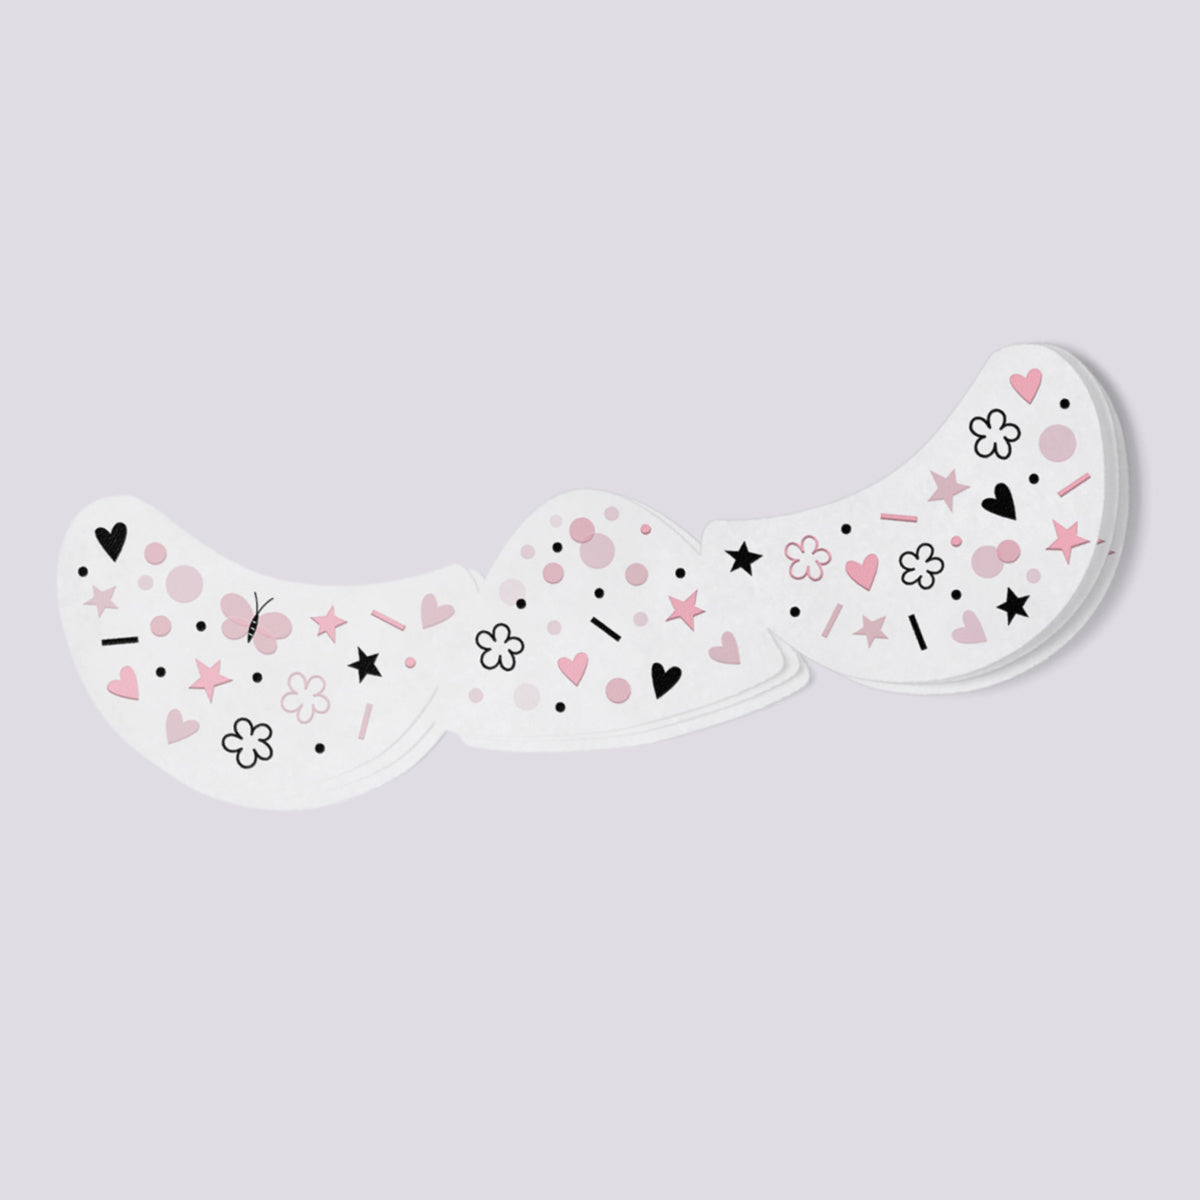 Pink Party freckles temporary tattoo